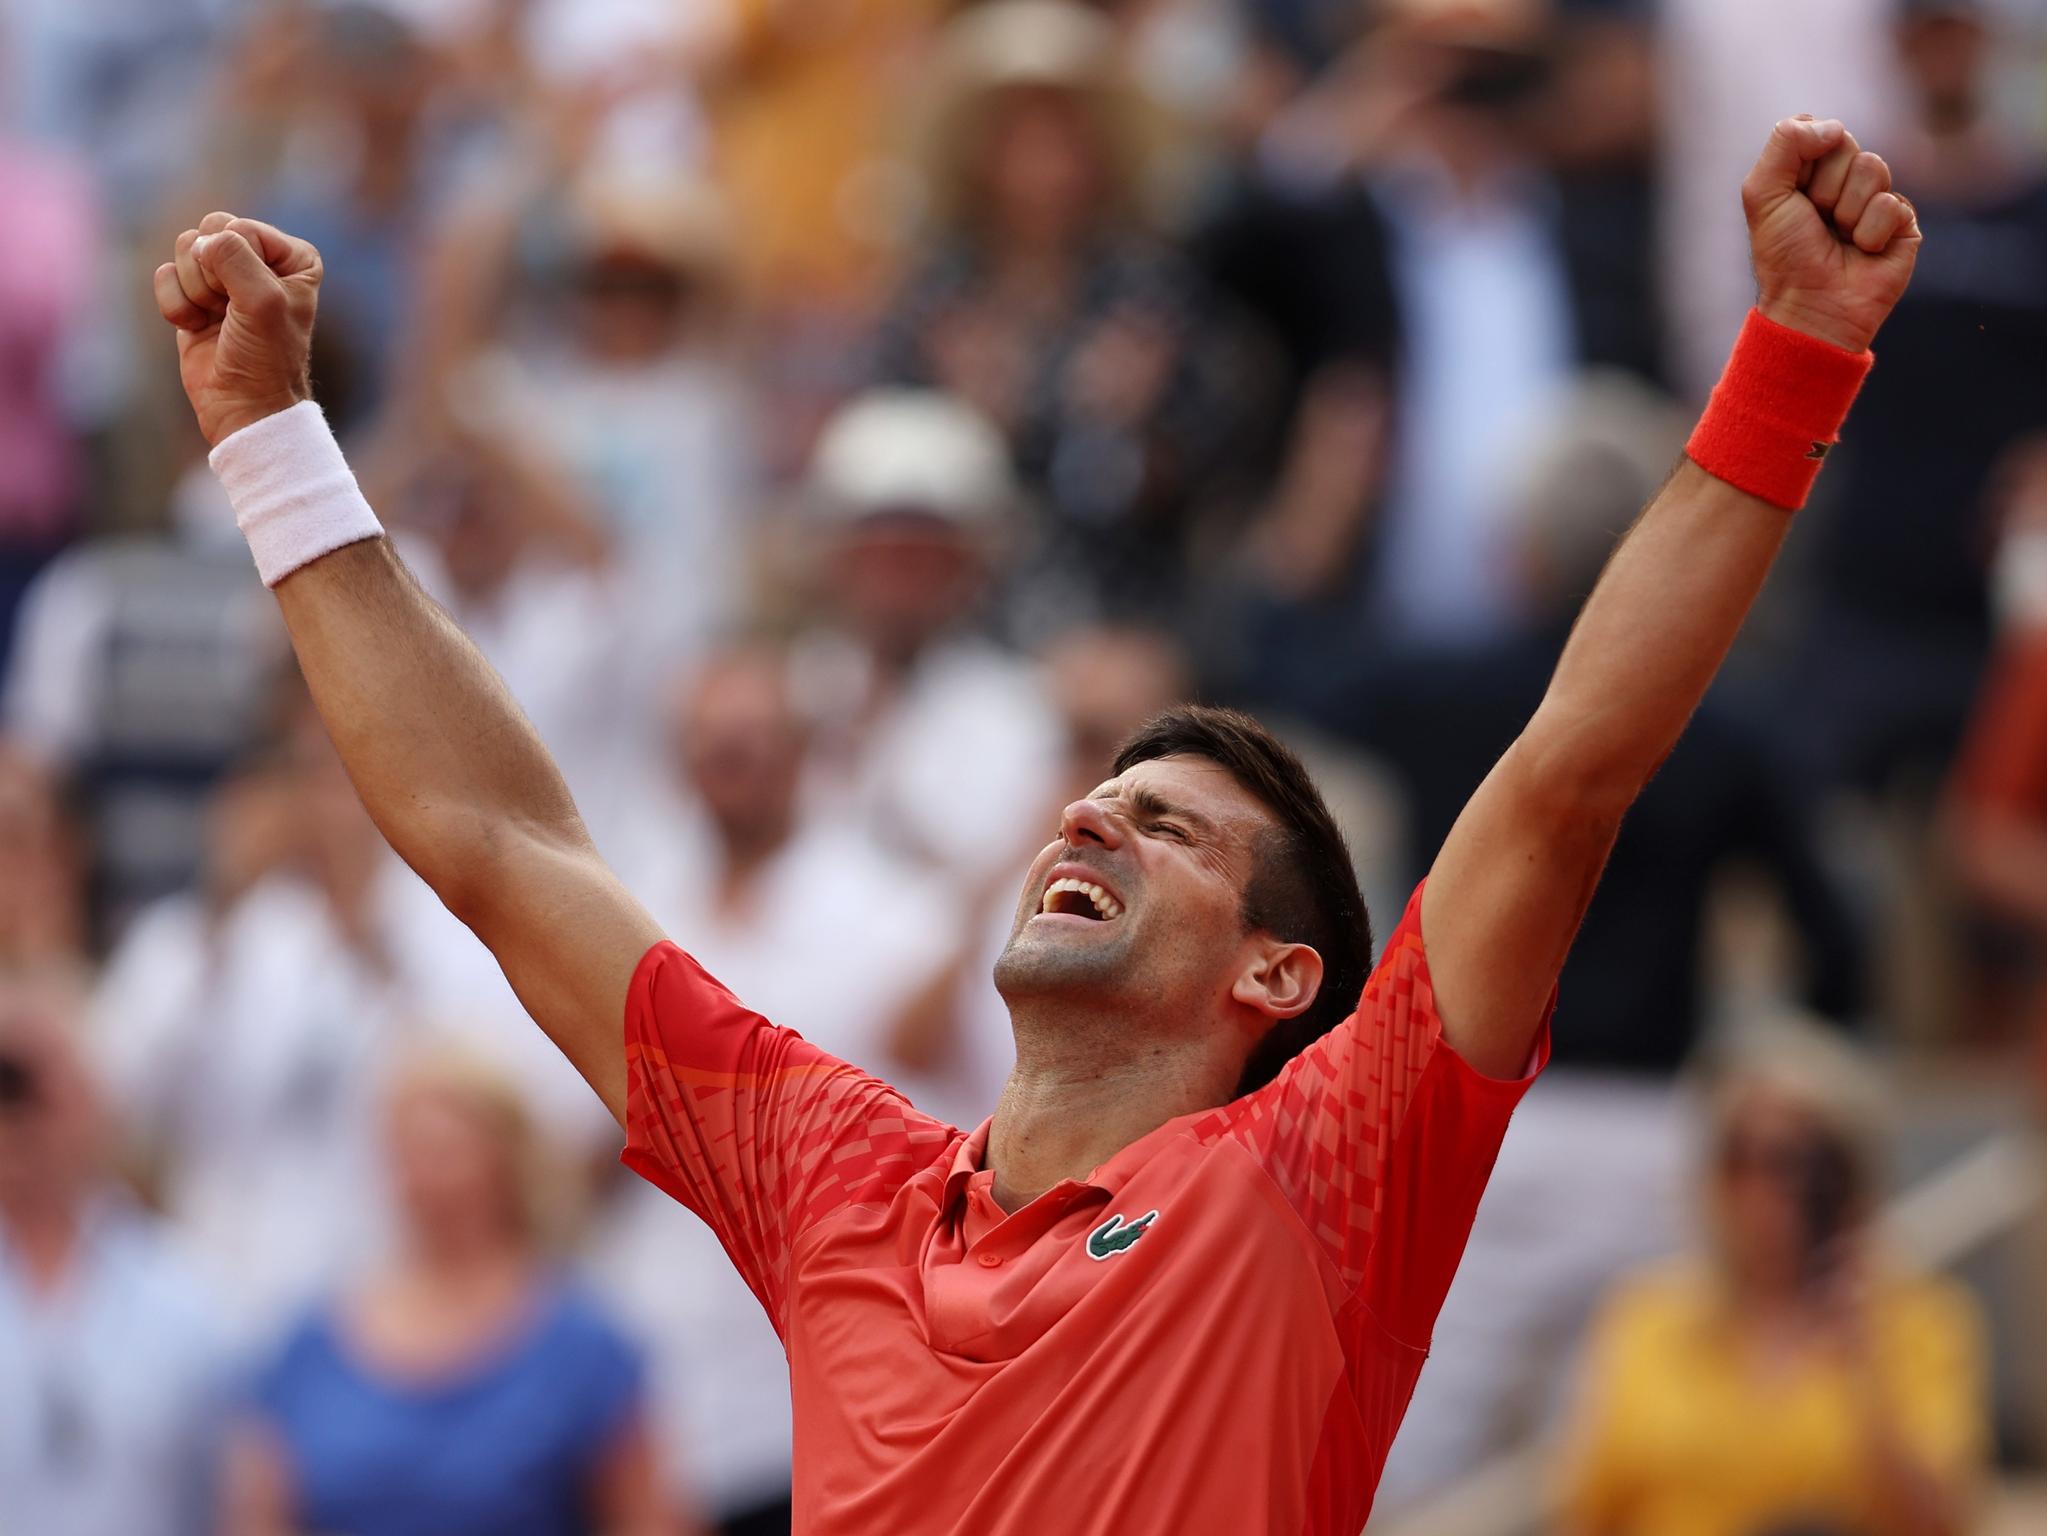 French Open: Novak Djokovic now officially the most successful men's player in history